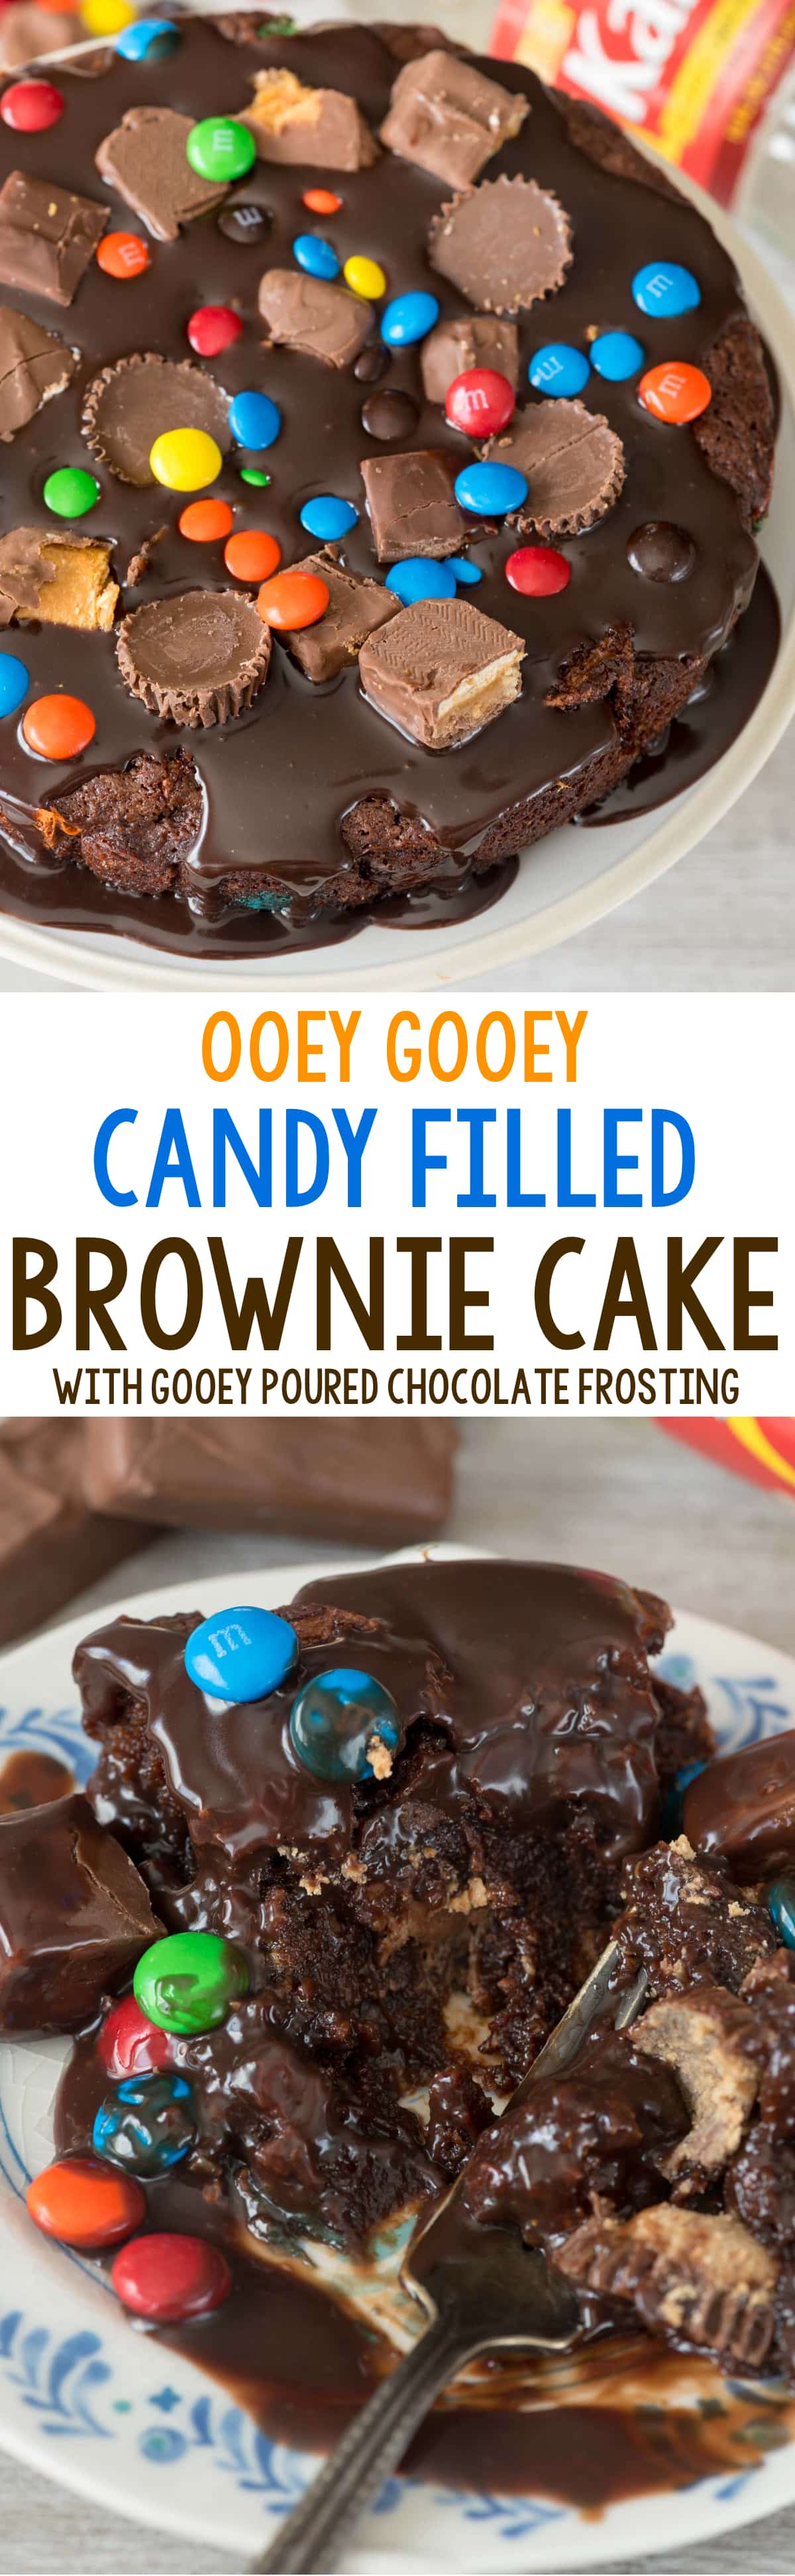 Gooey Candy Filled Brownie Cake - this EASY brownie recipe is baked like a cake, FILLED with candy, and topped with a pourable chocolate frosting. It's chocolate heaven!